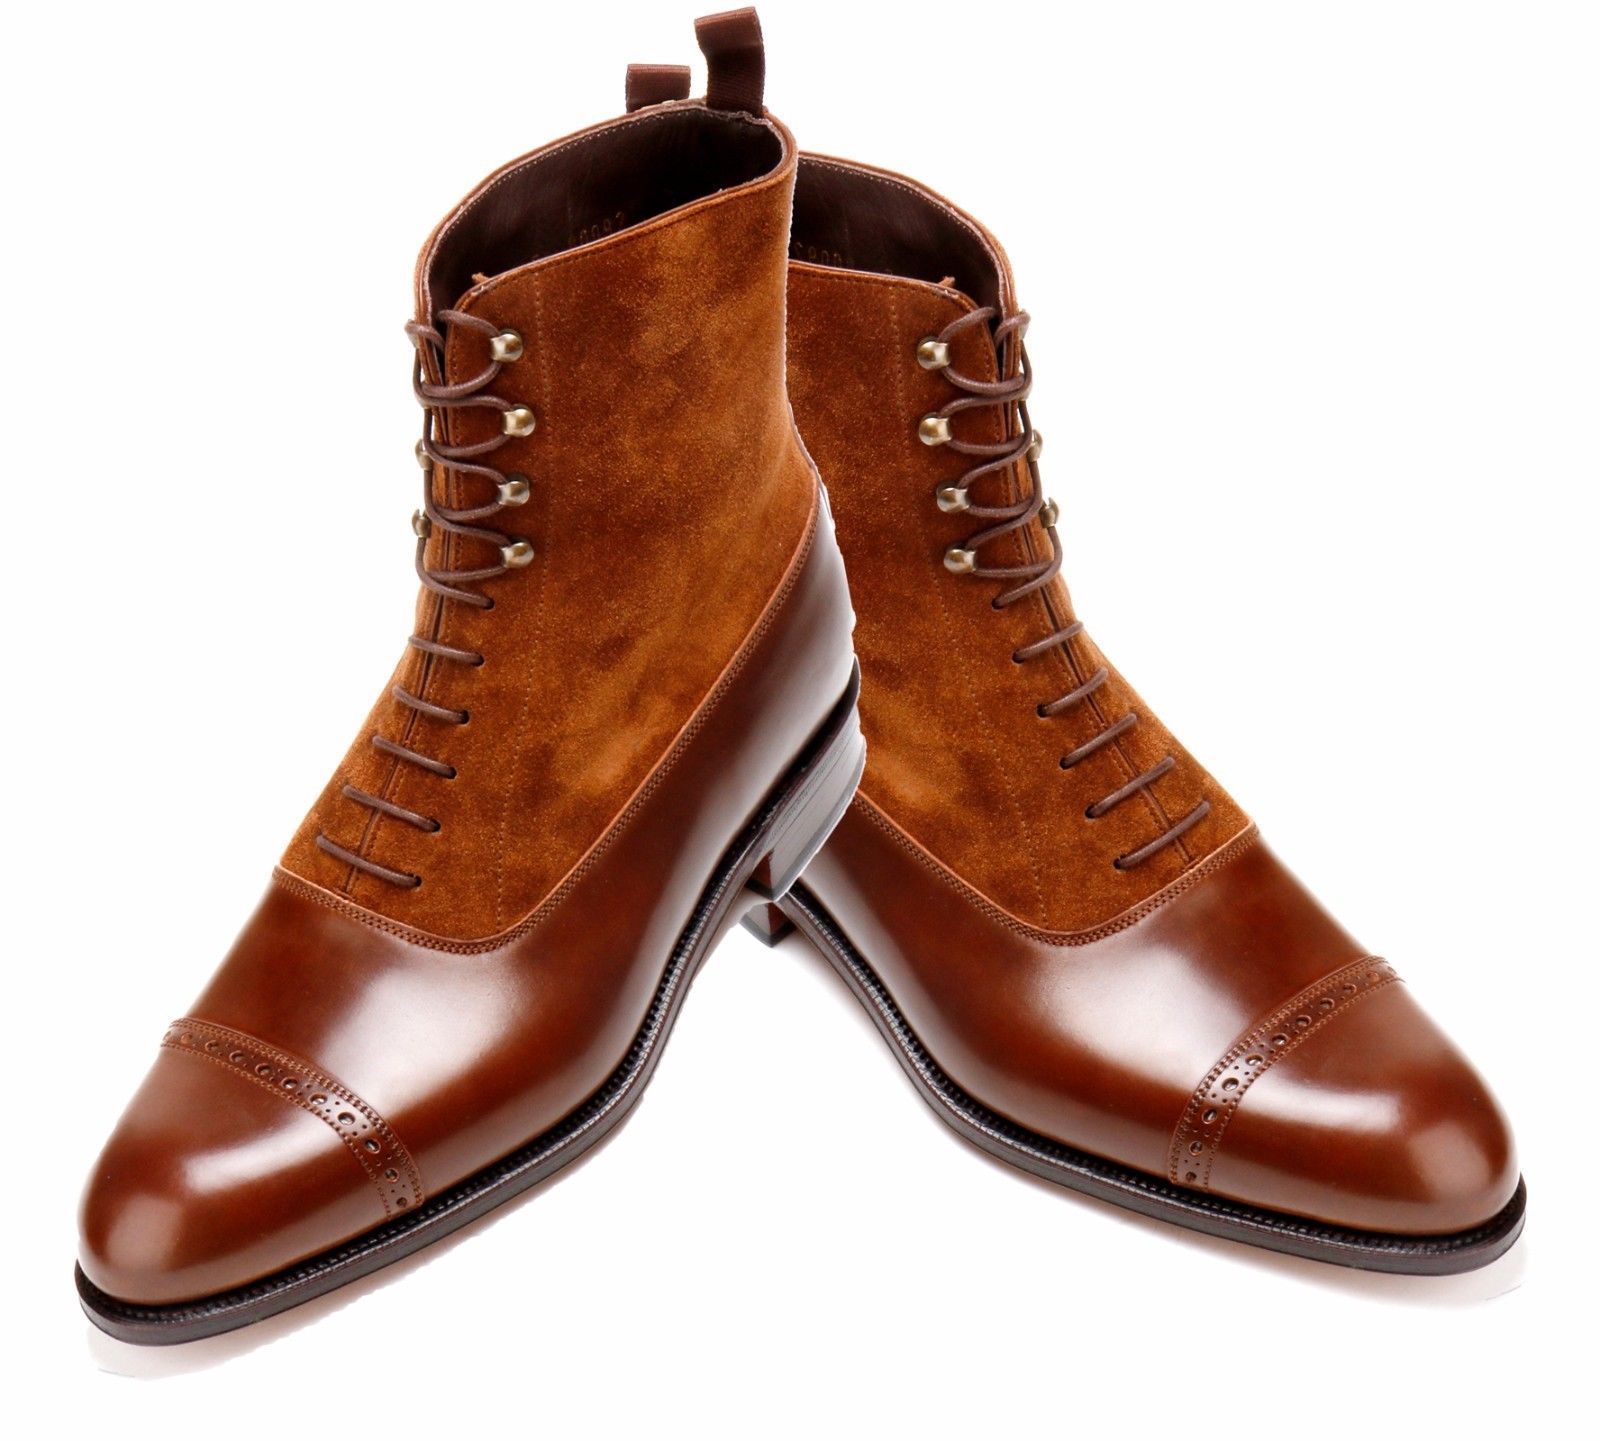 New mens Ankle High Two Tone Boots. Cap Toe Style Tan Suede & Leather Men Boot - $174.99